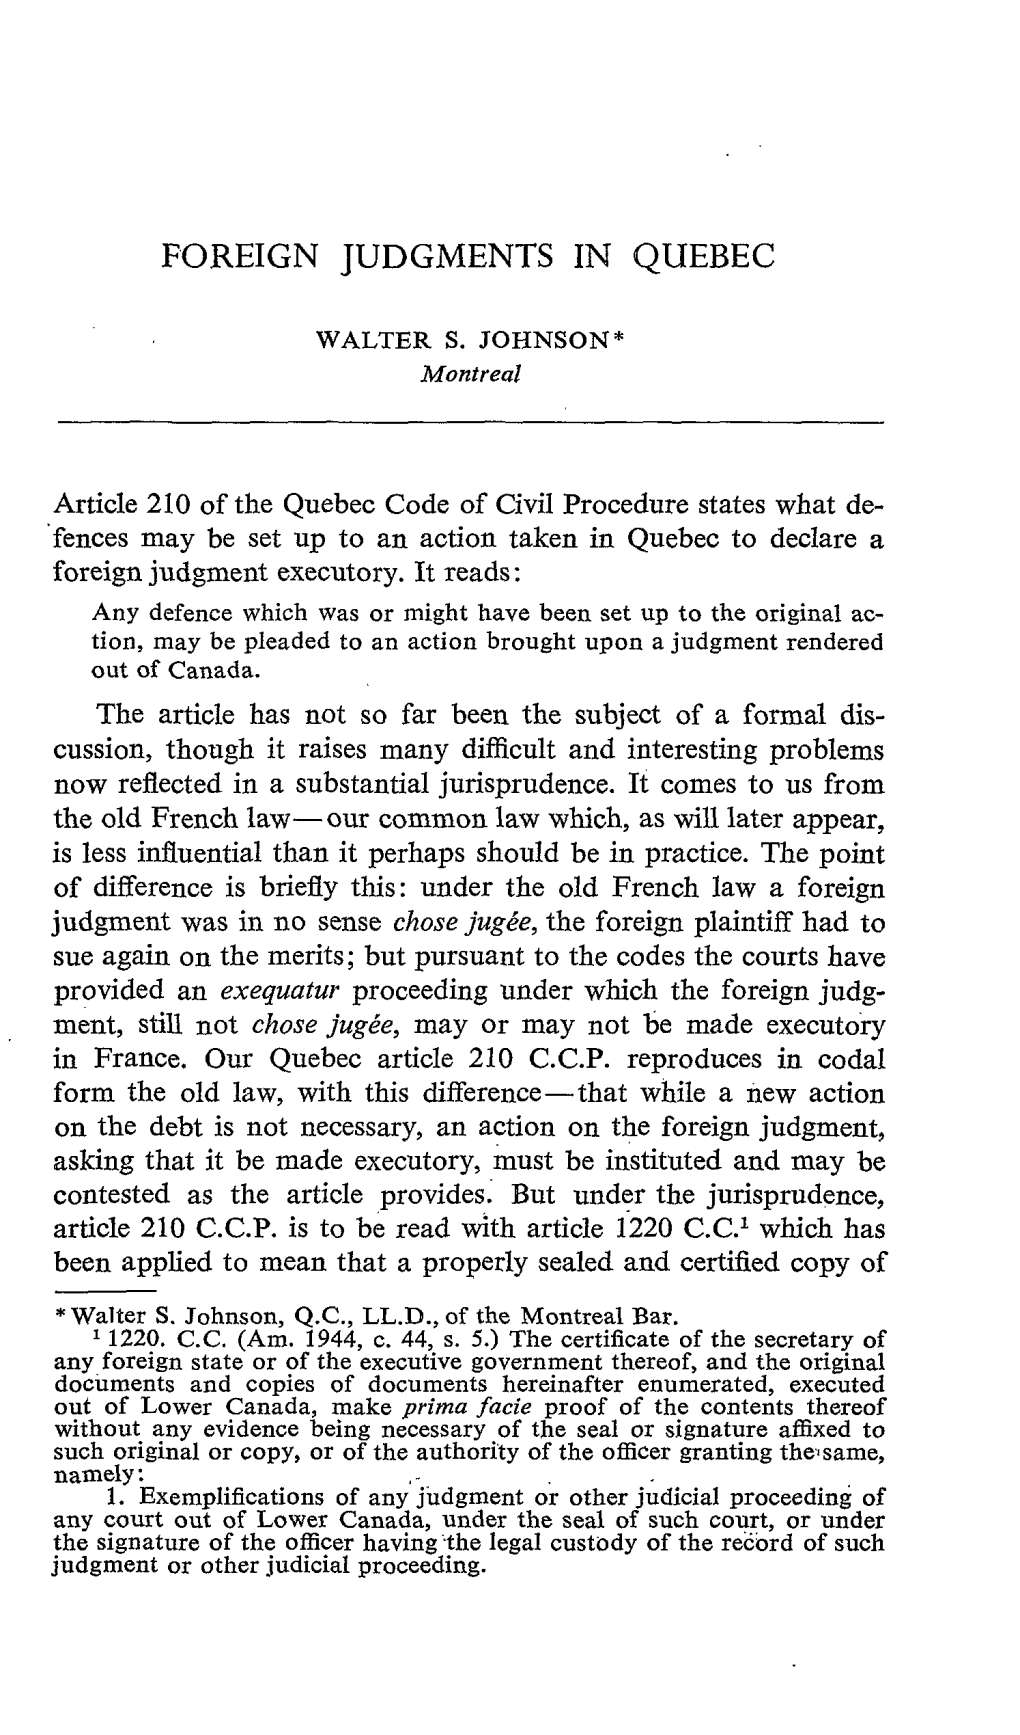 FOREIGN JUDGMENTS in QUEBEC WALTER S. JOHNSON Article 210